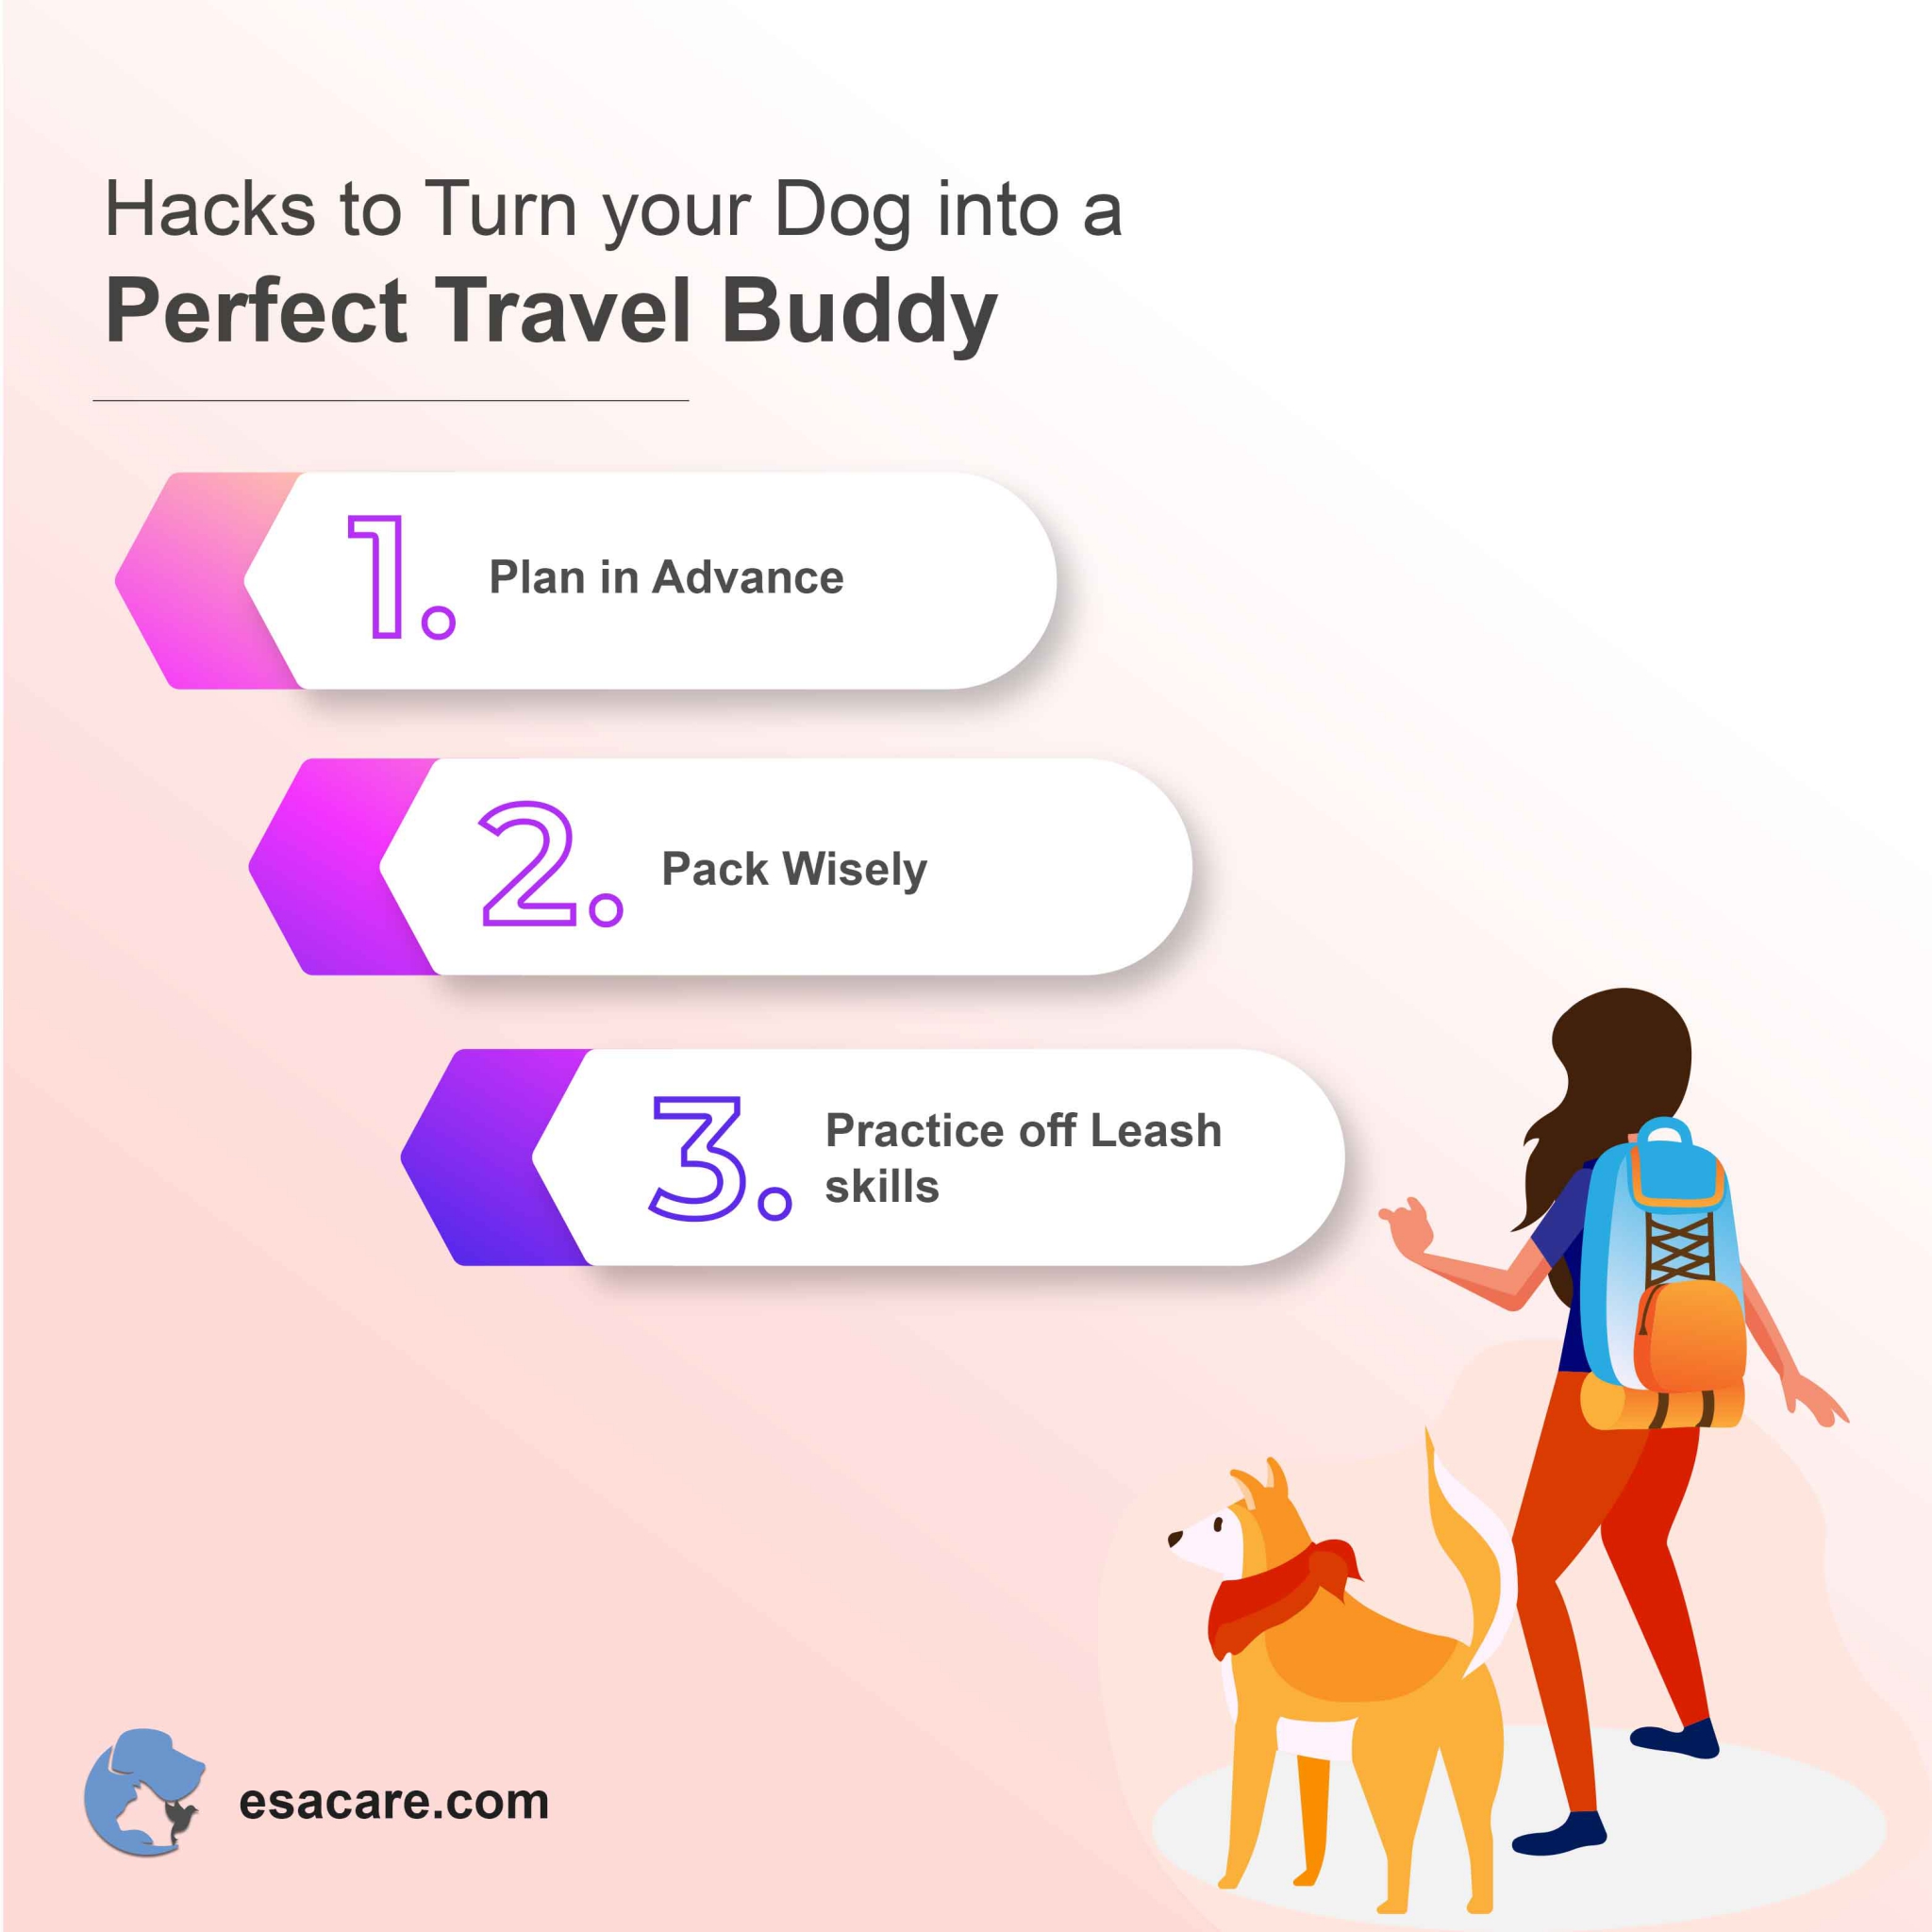 Travel with your dog